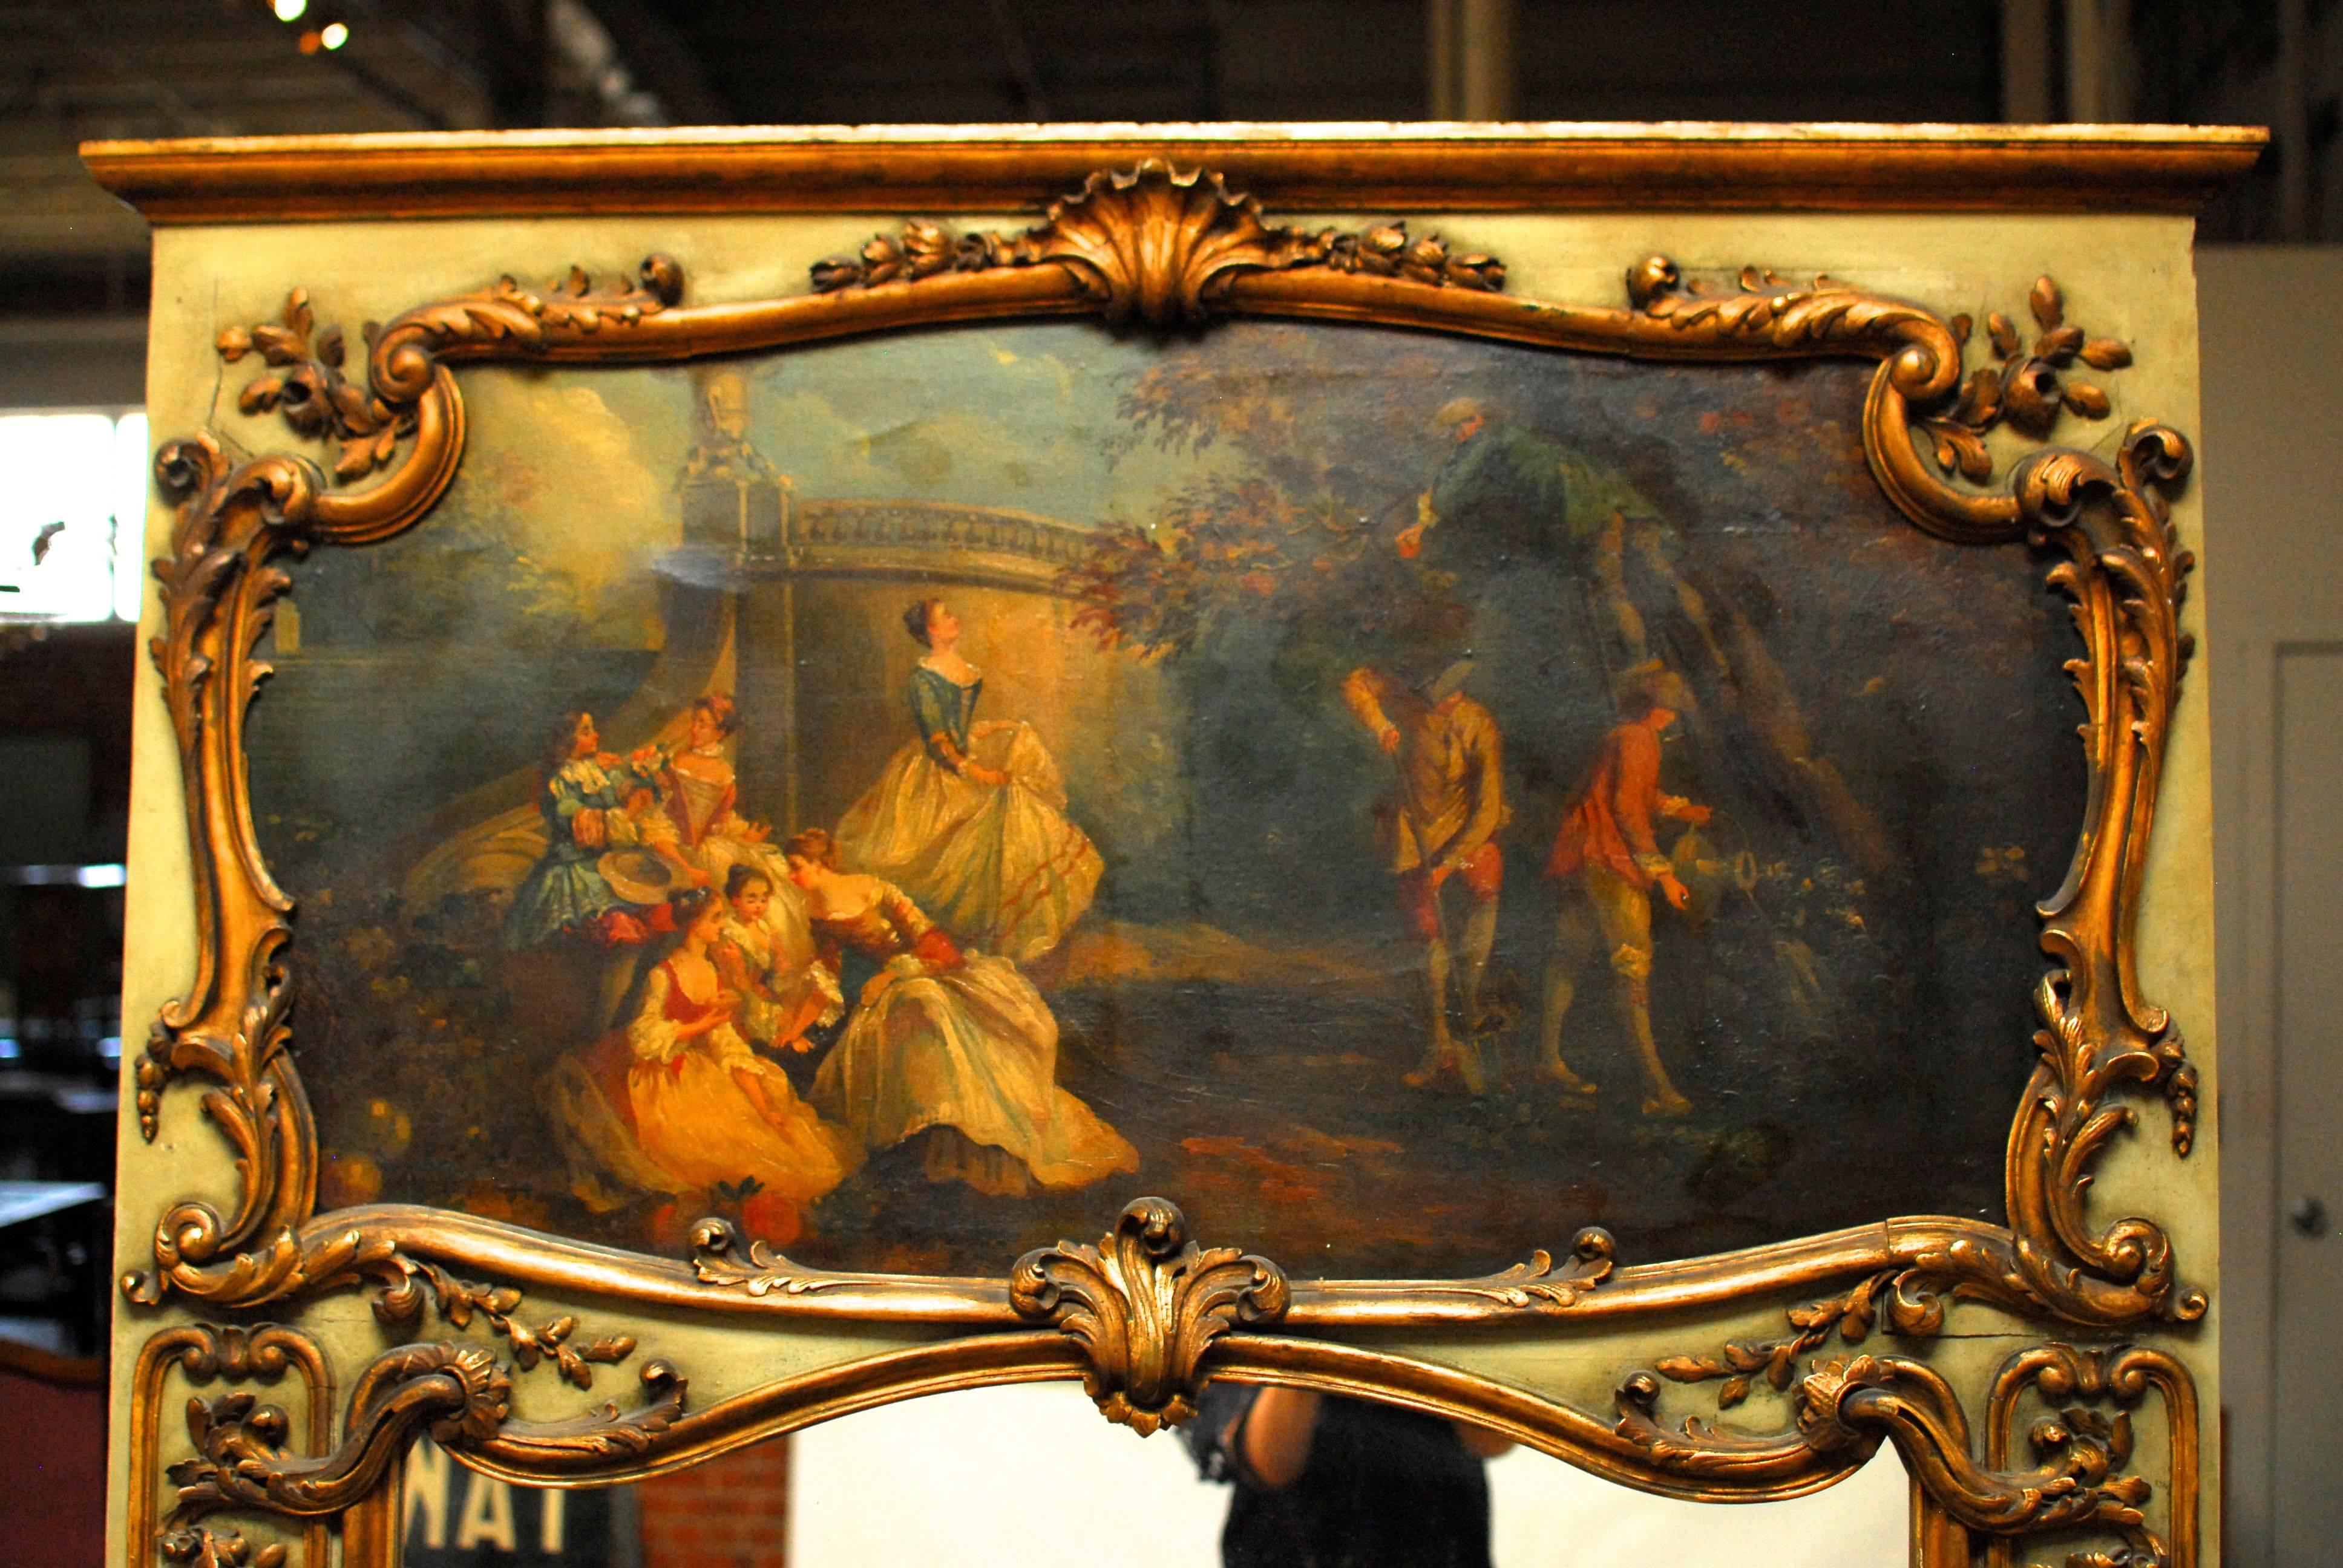 Monumental Louis XV Style trumeau mirror featuring an idyllic oil on canvas painted country scene. Parcel-gilt frame finished in a pale robin's egg blue and adorned with acanthus and floral designs with a shell crest. Dramatic size mirror that also